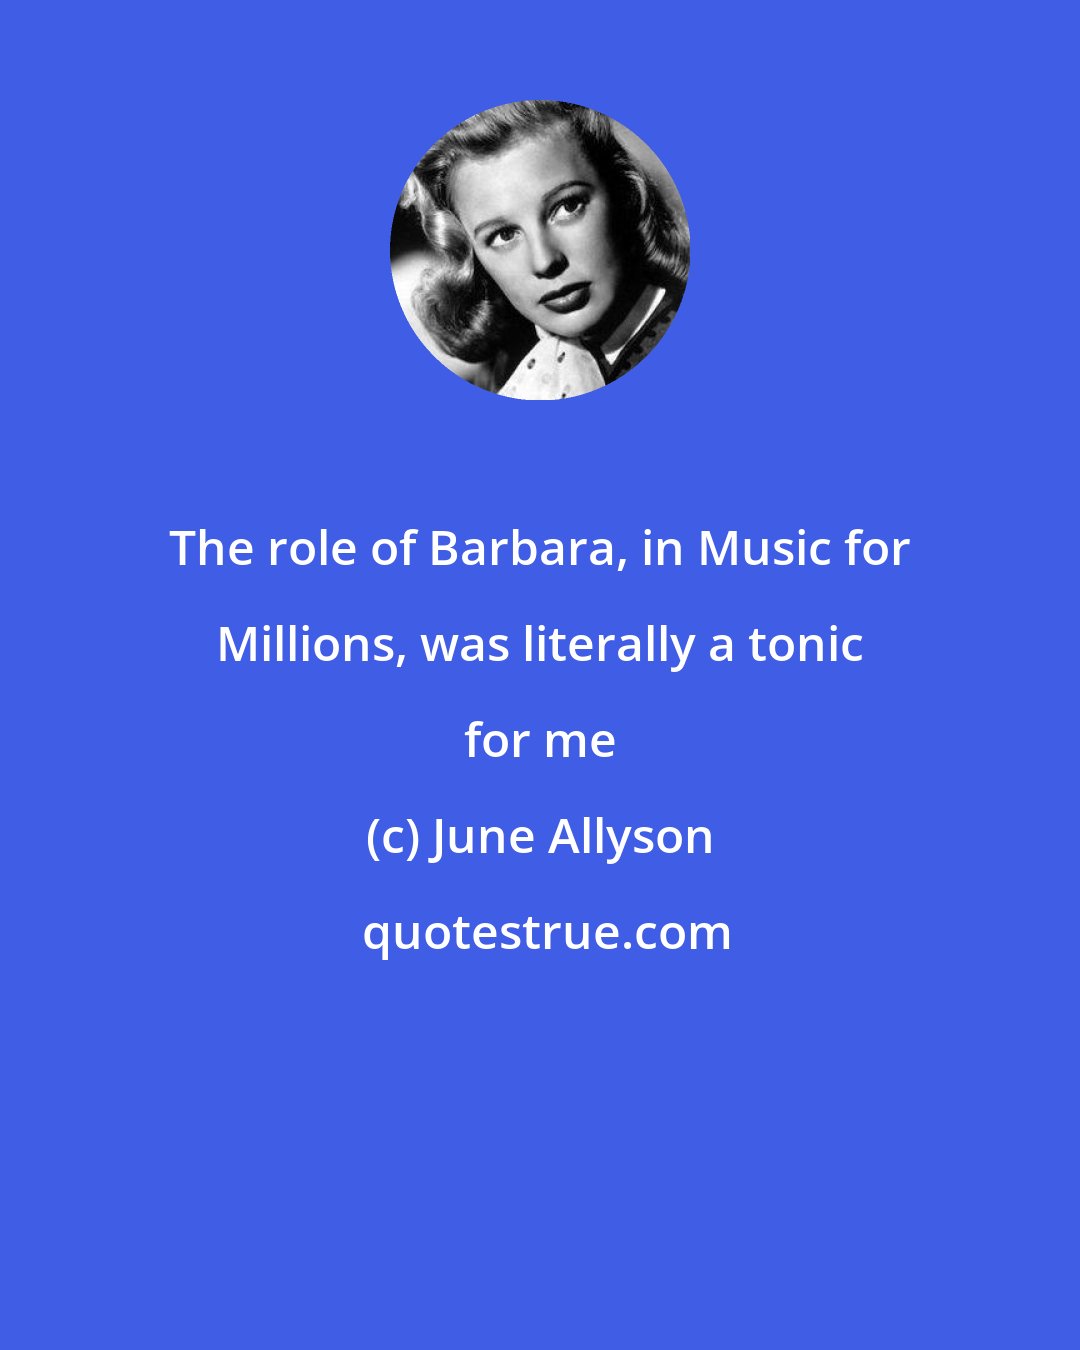 June Allyson: The role of Barbara, in Music for Millions, was literally a tonic for me